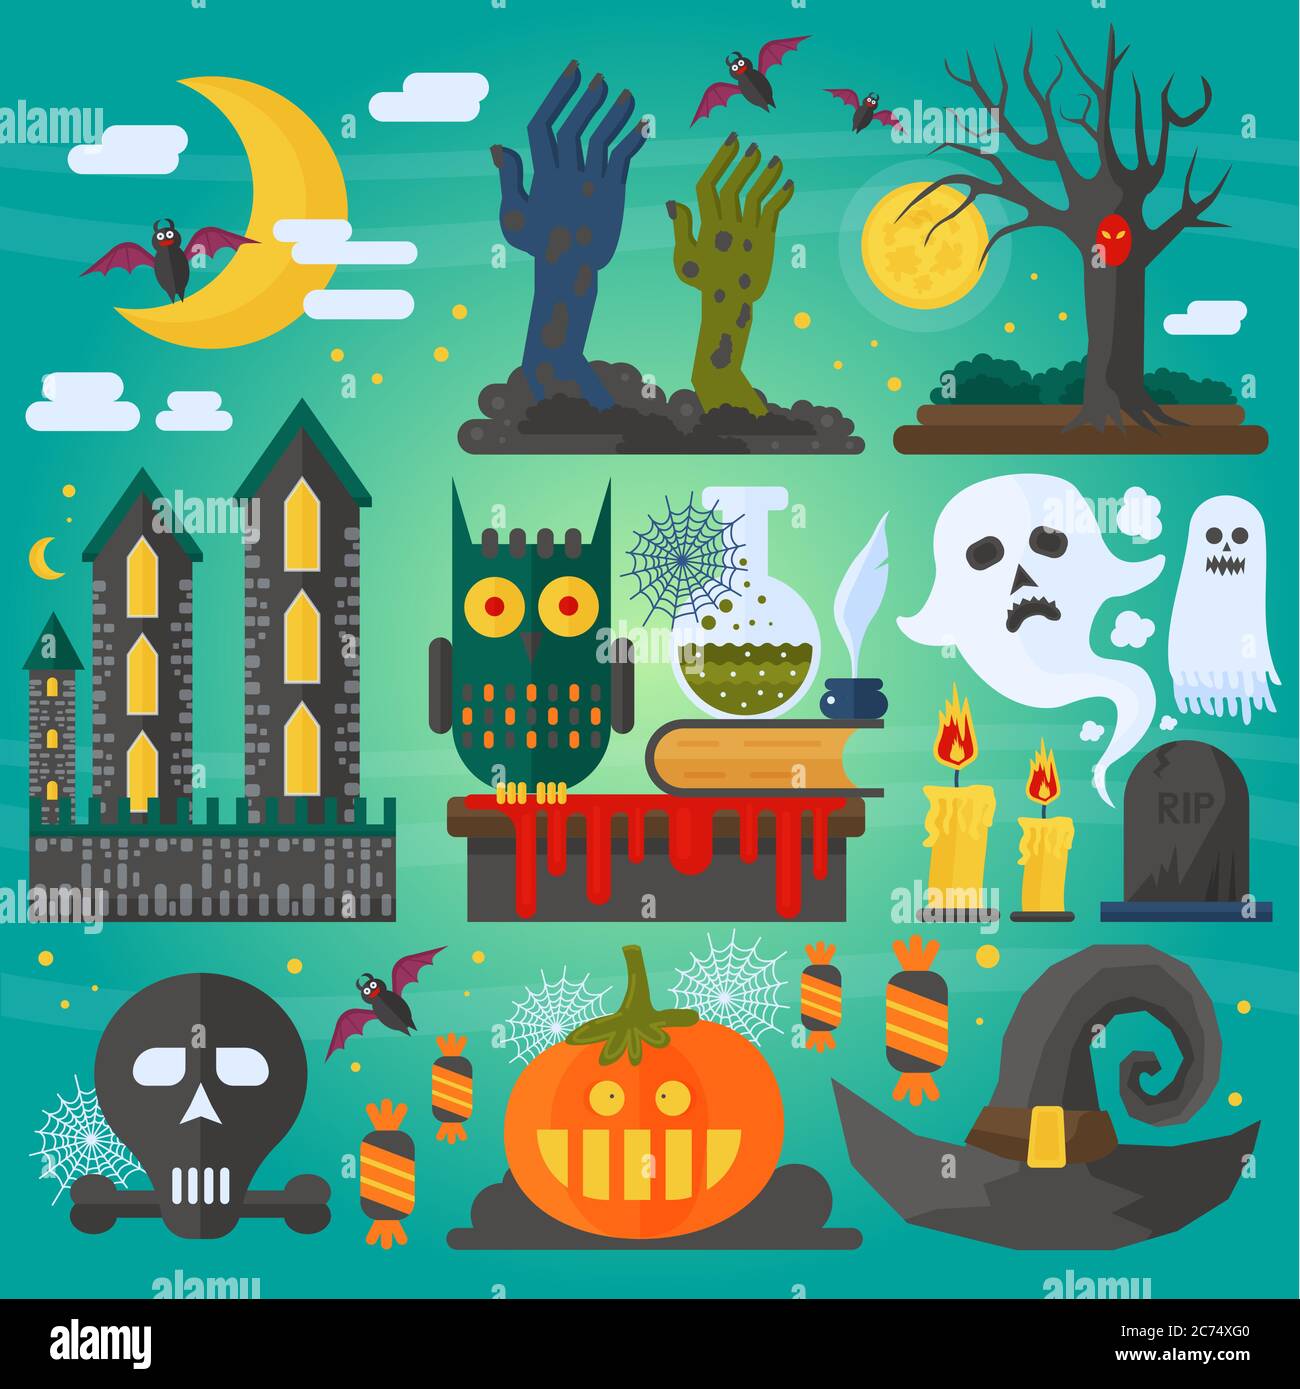 Vector illustration of zombie hands, bats, owl, ghost, castle and other different spooky elements and decorations for Halloween Stock Vector